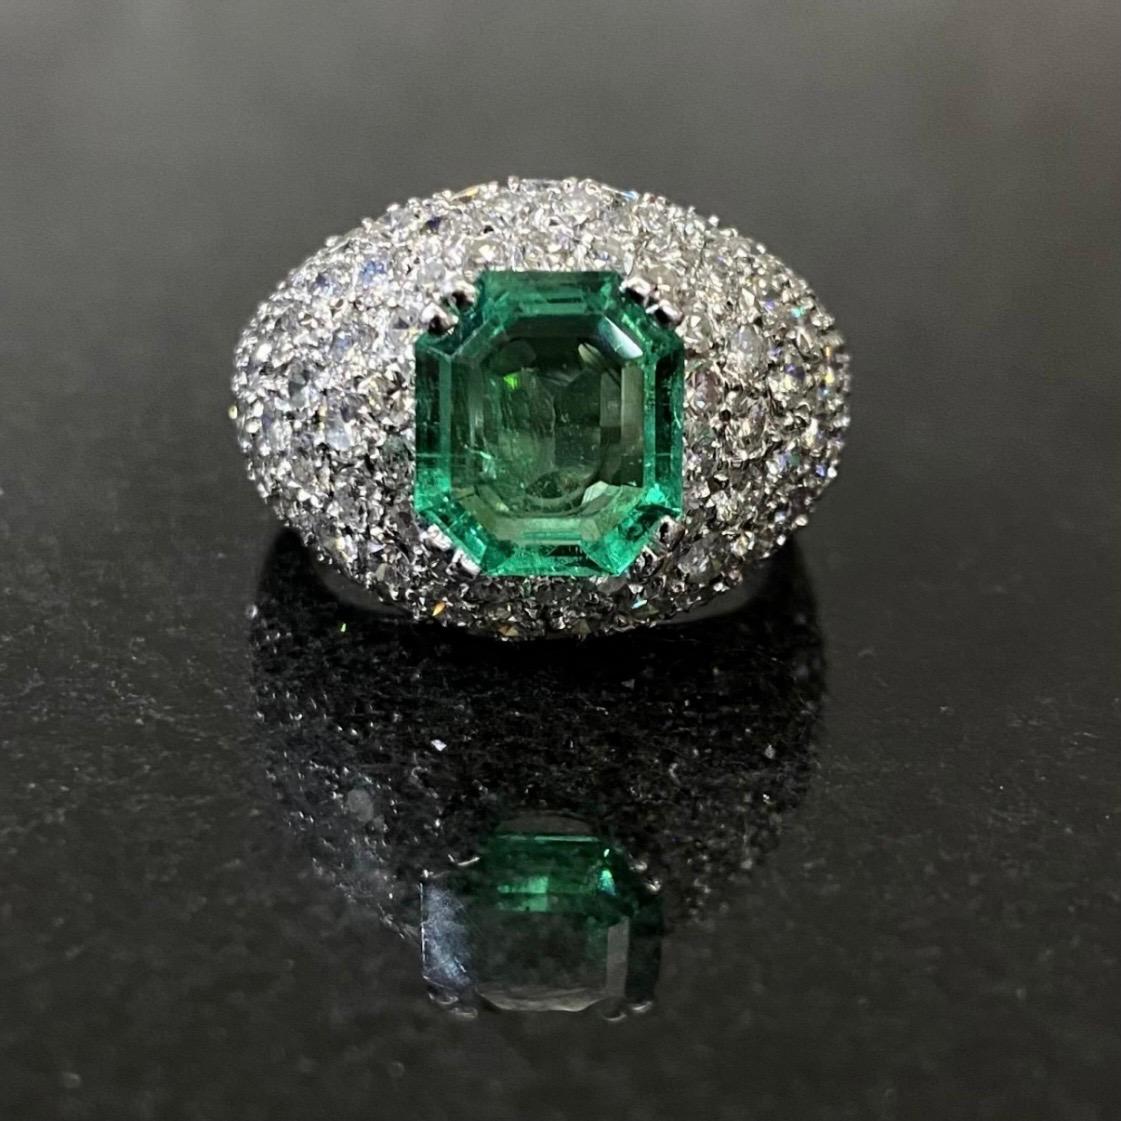 Vintage 1960s/1970s Colombian Emerald Diamond Bombe Cocktail Ring Platinum 8